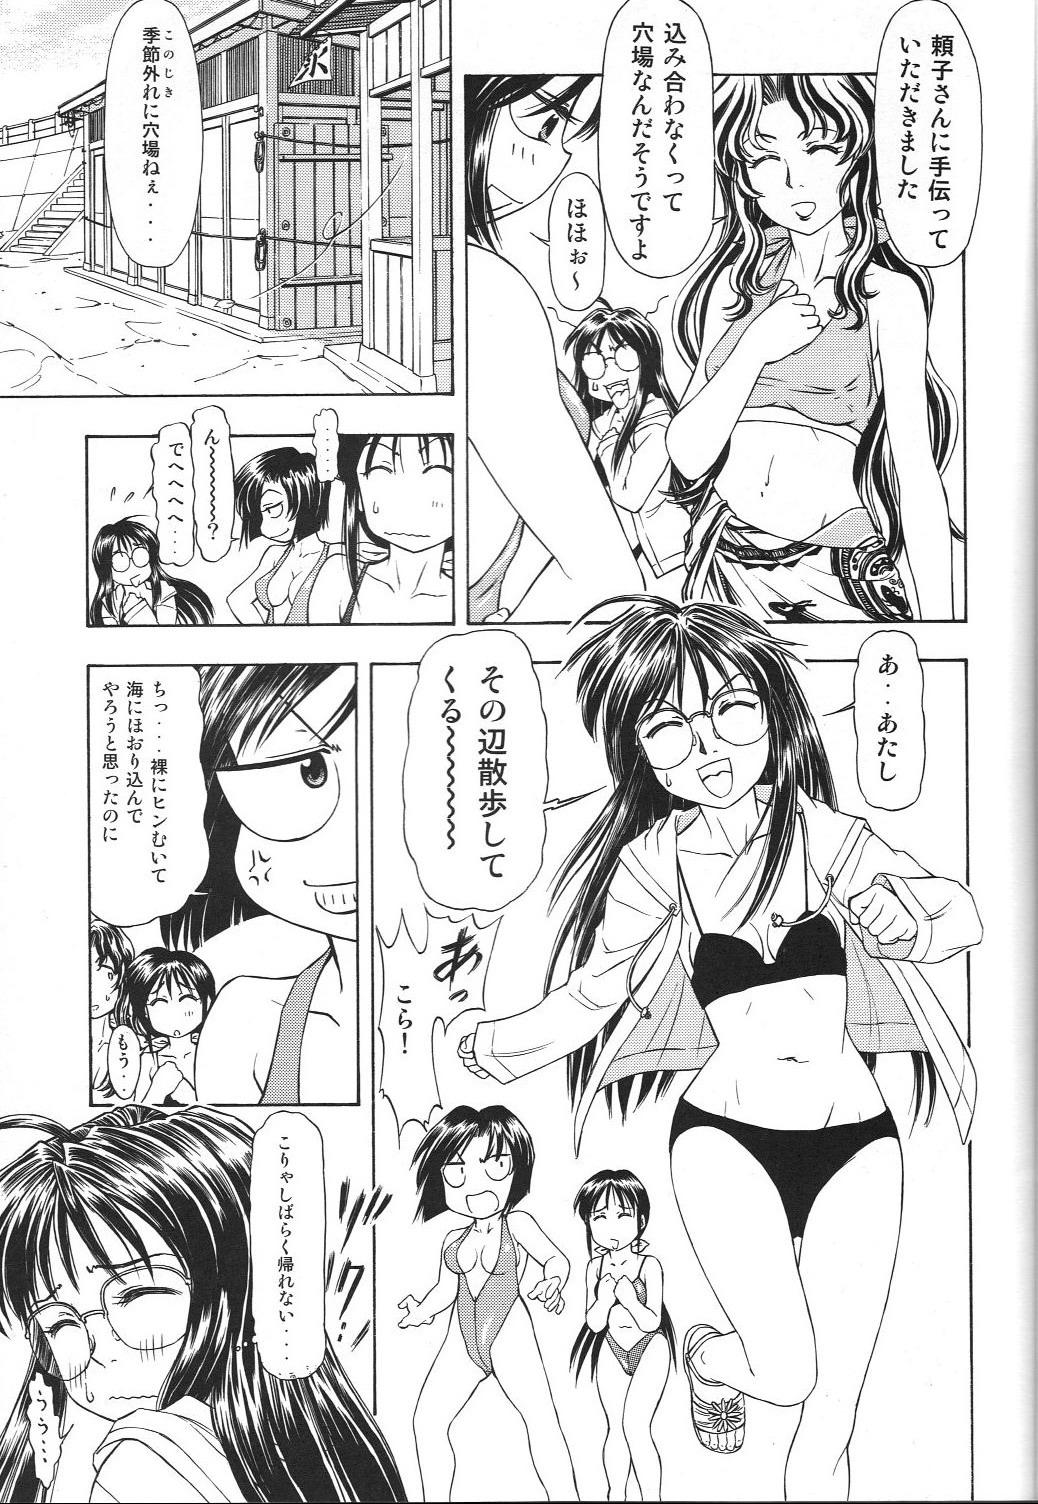 Euro Porn TAIHO++ file02 - Youre under arrest Prostitute - Page 8